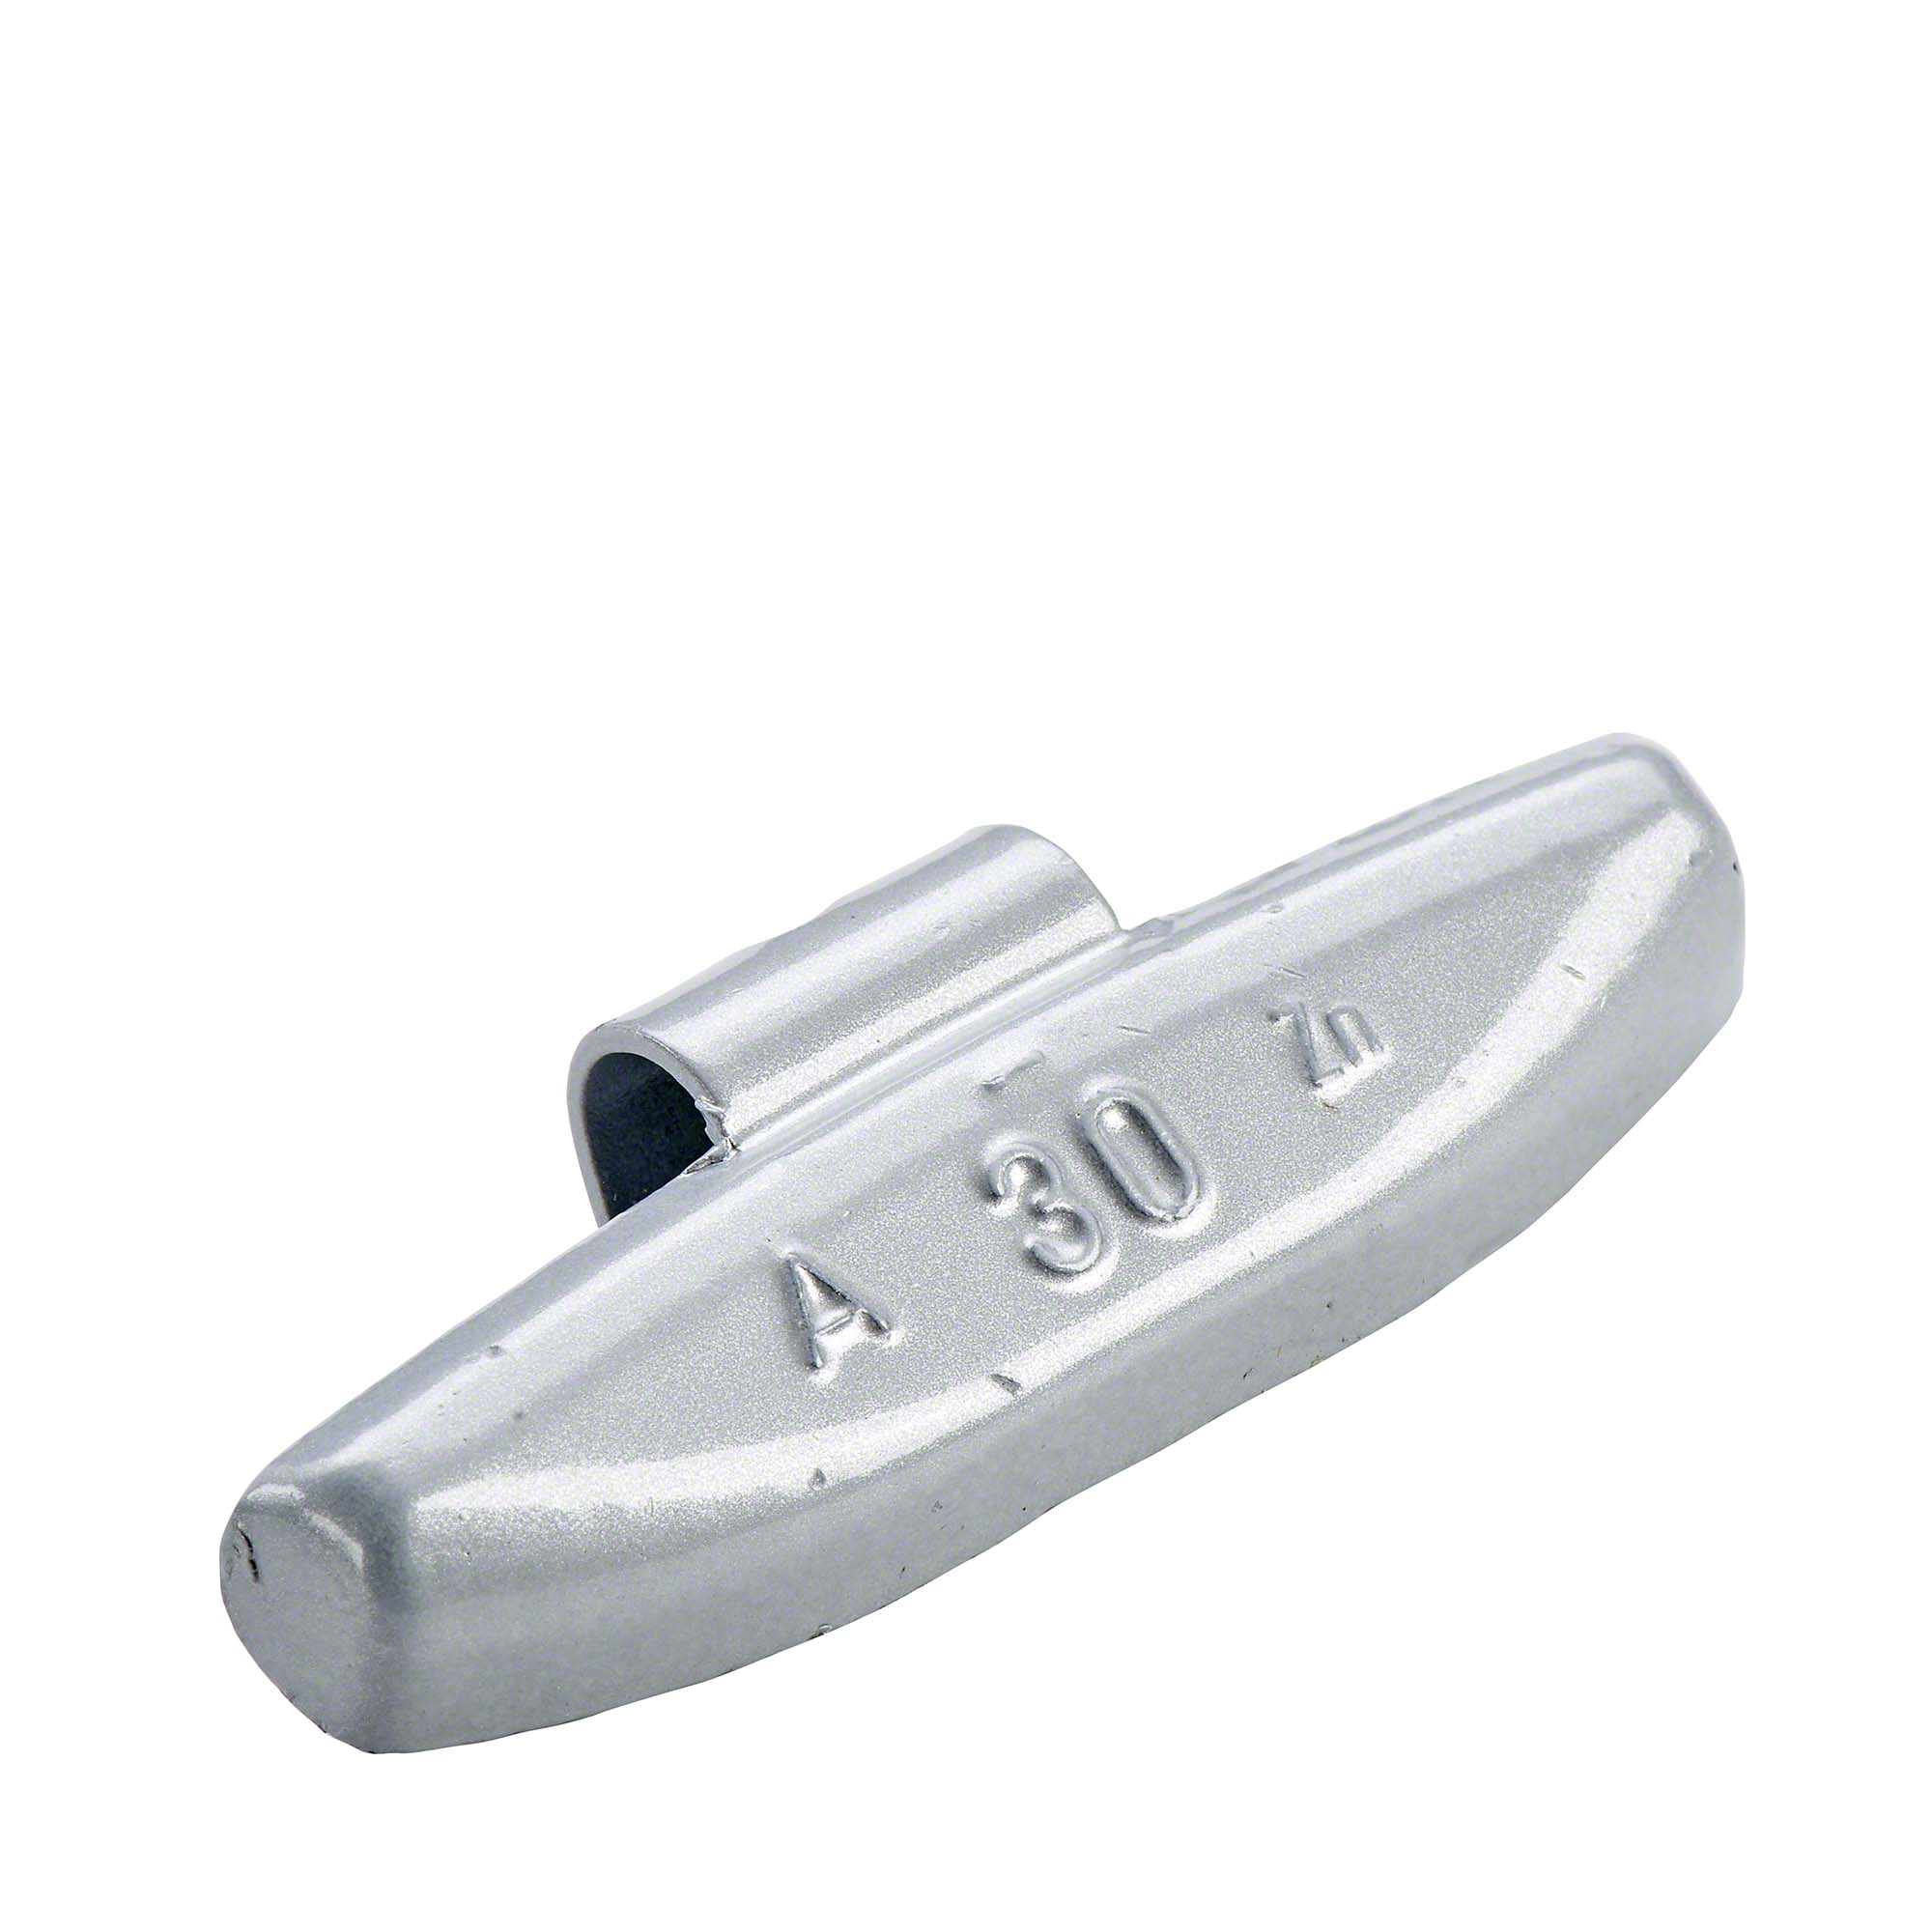 knock-on weight - Typ 63, 30 g, zinc, silver